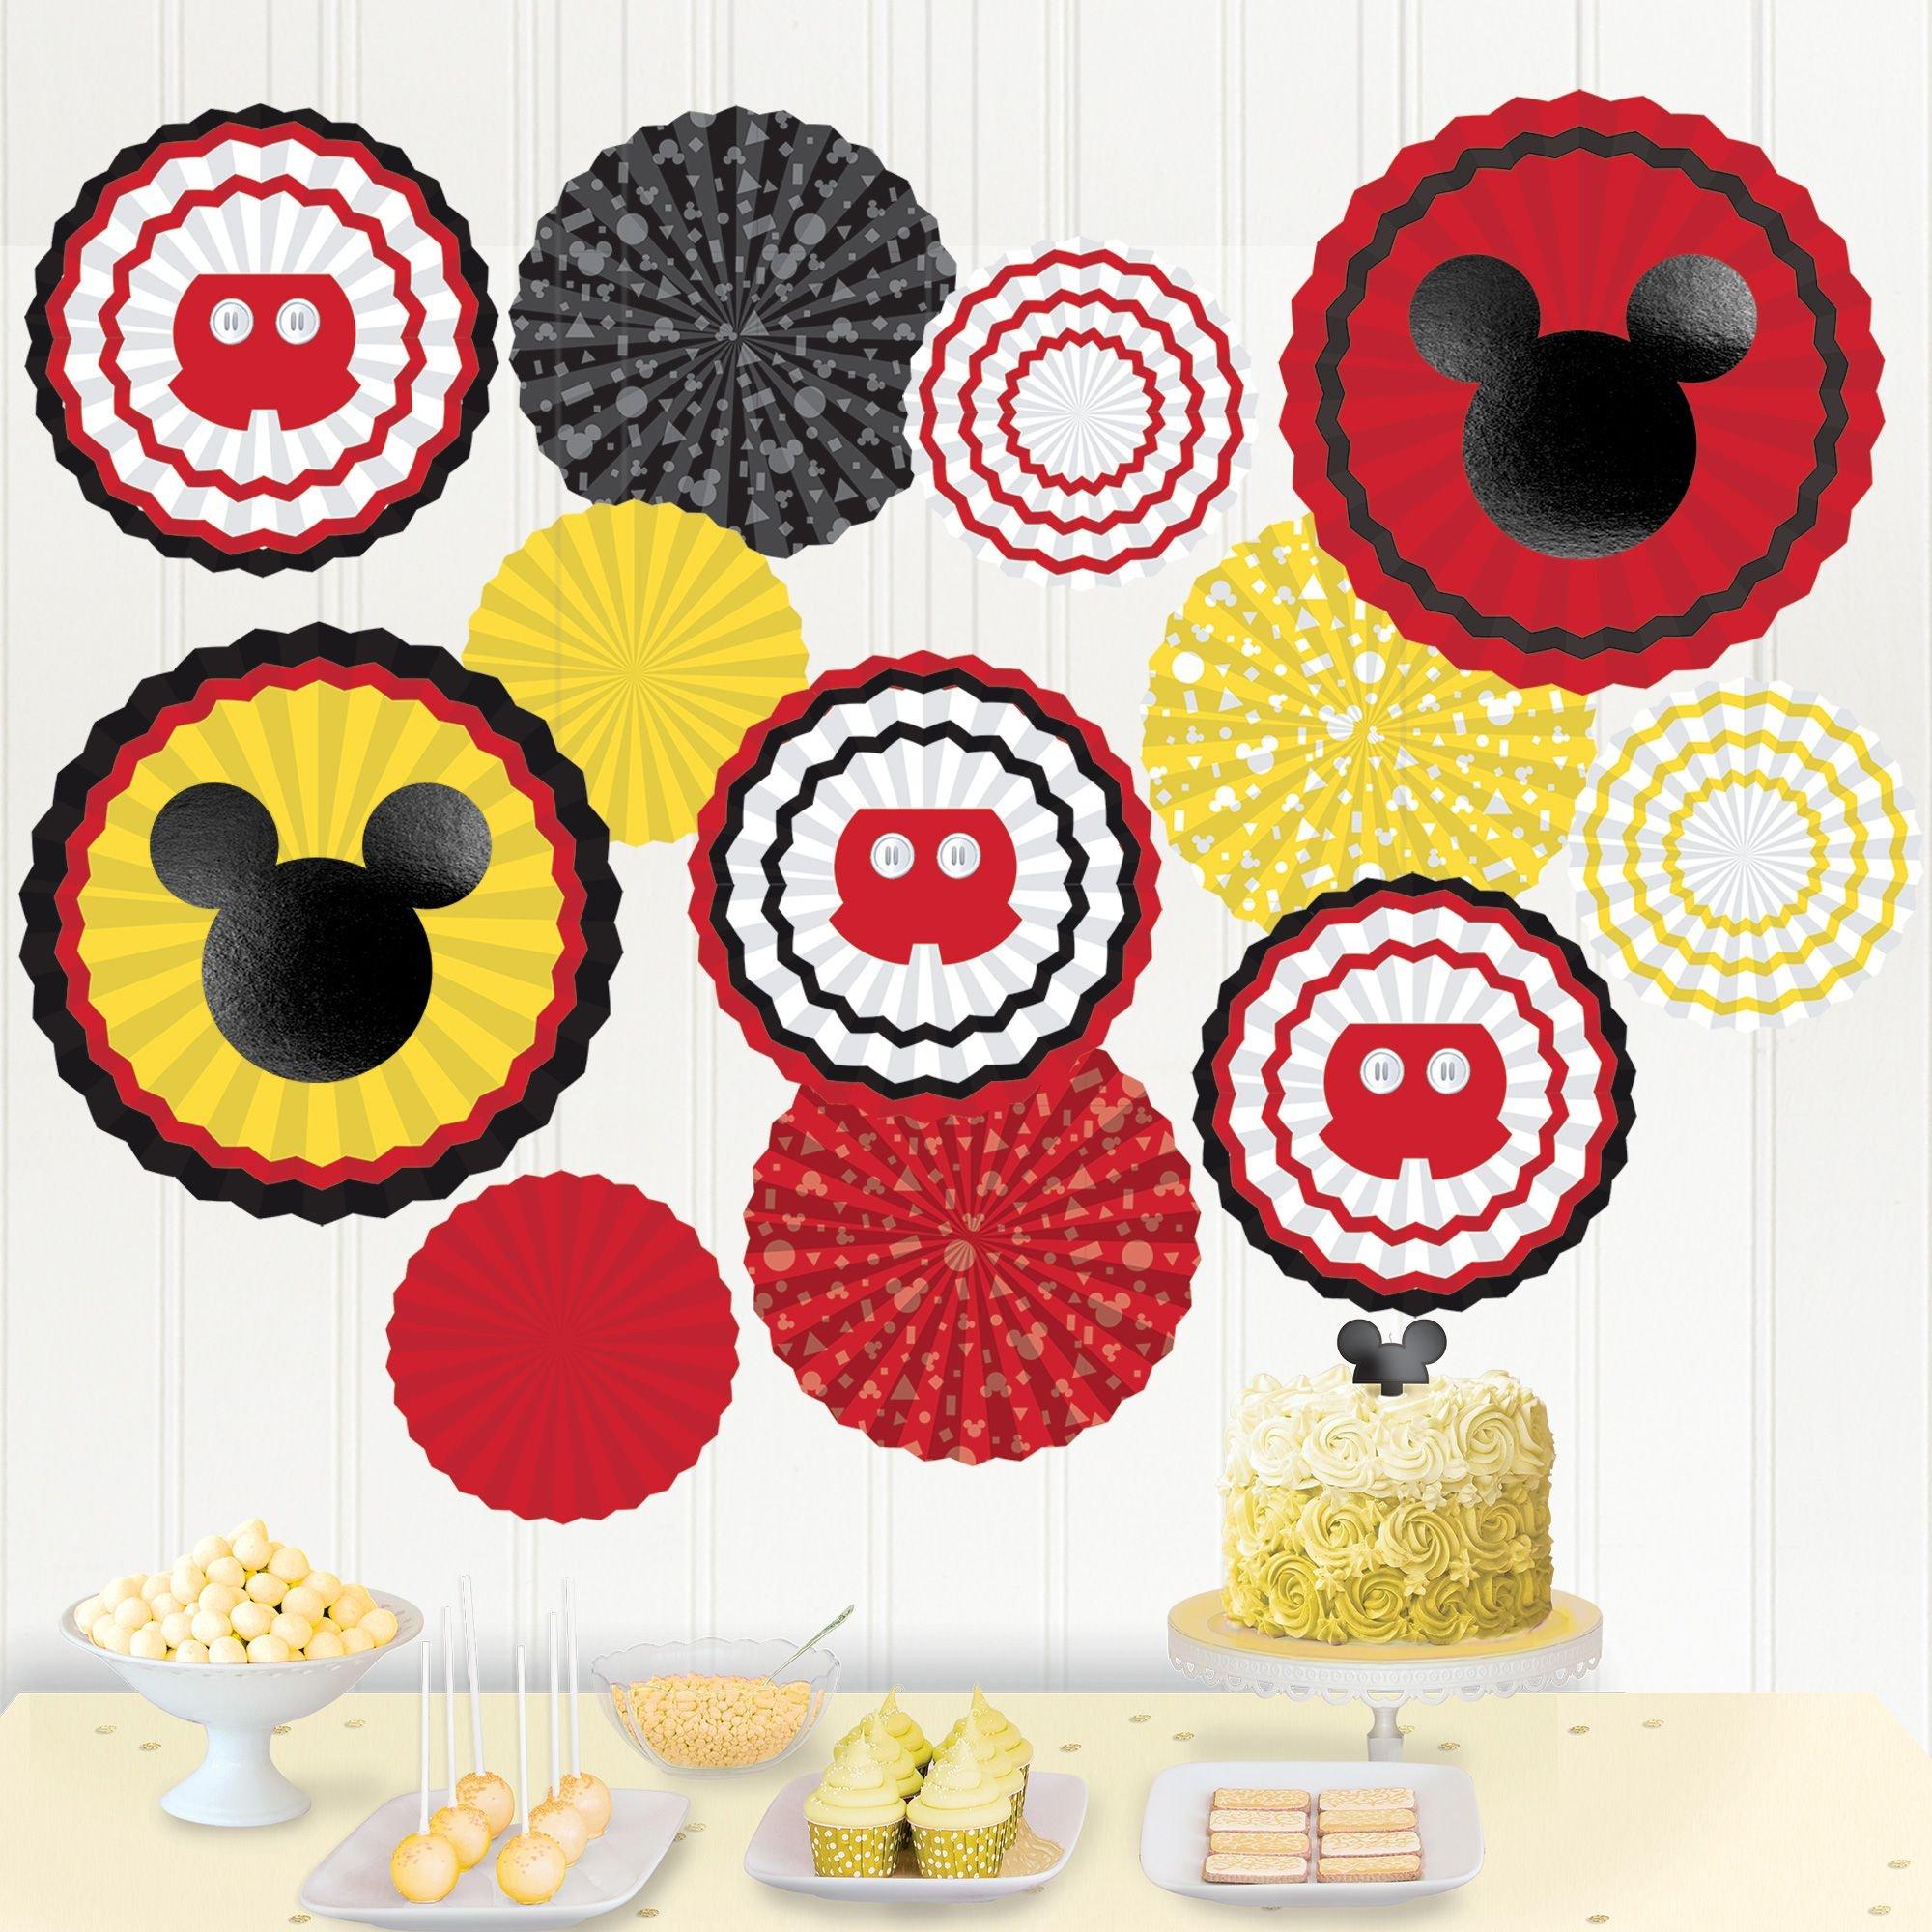 MICKEY MOUSE BIRTHDAY PARTY DECORATIONS PERSONALIZE BANNER HATS DECORATING  KIT